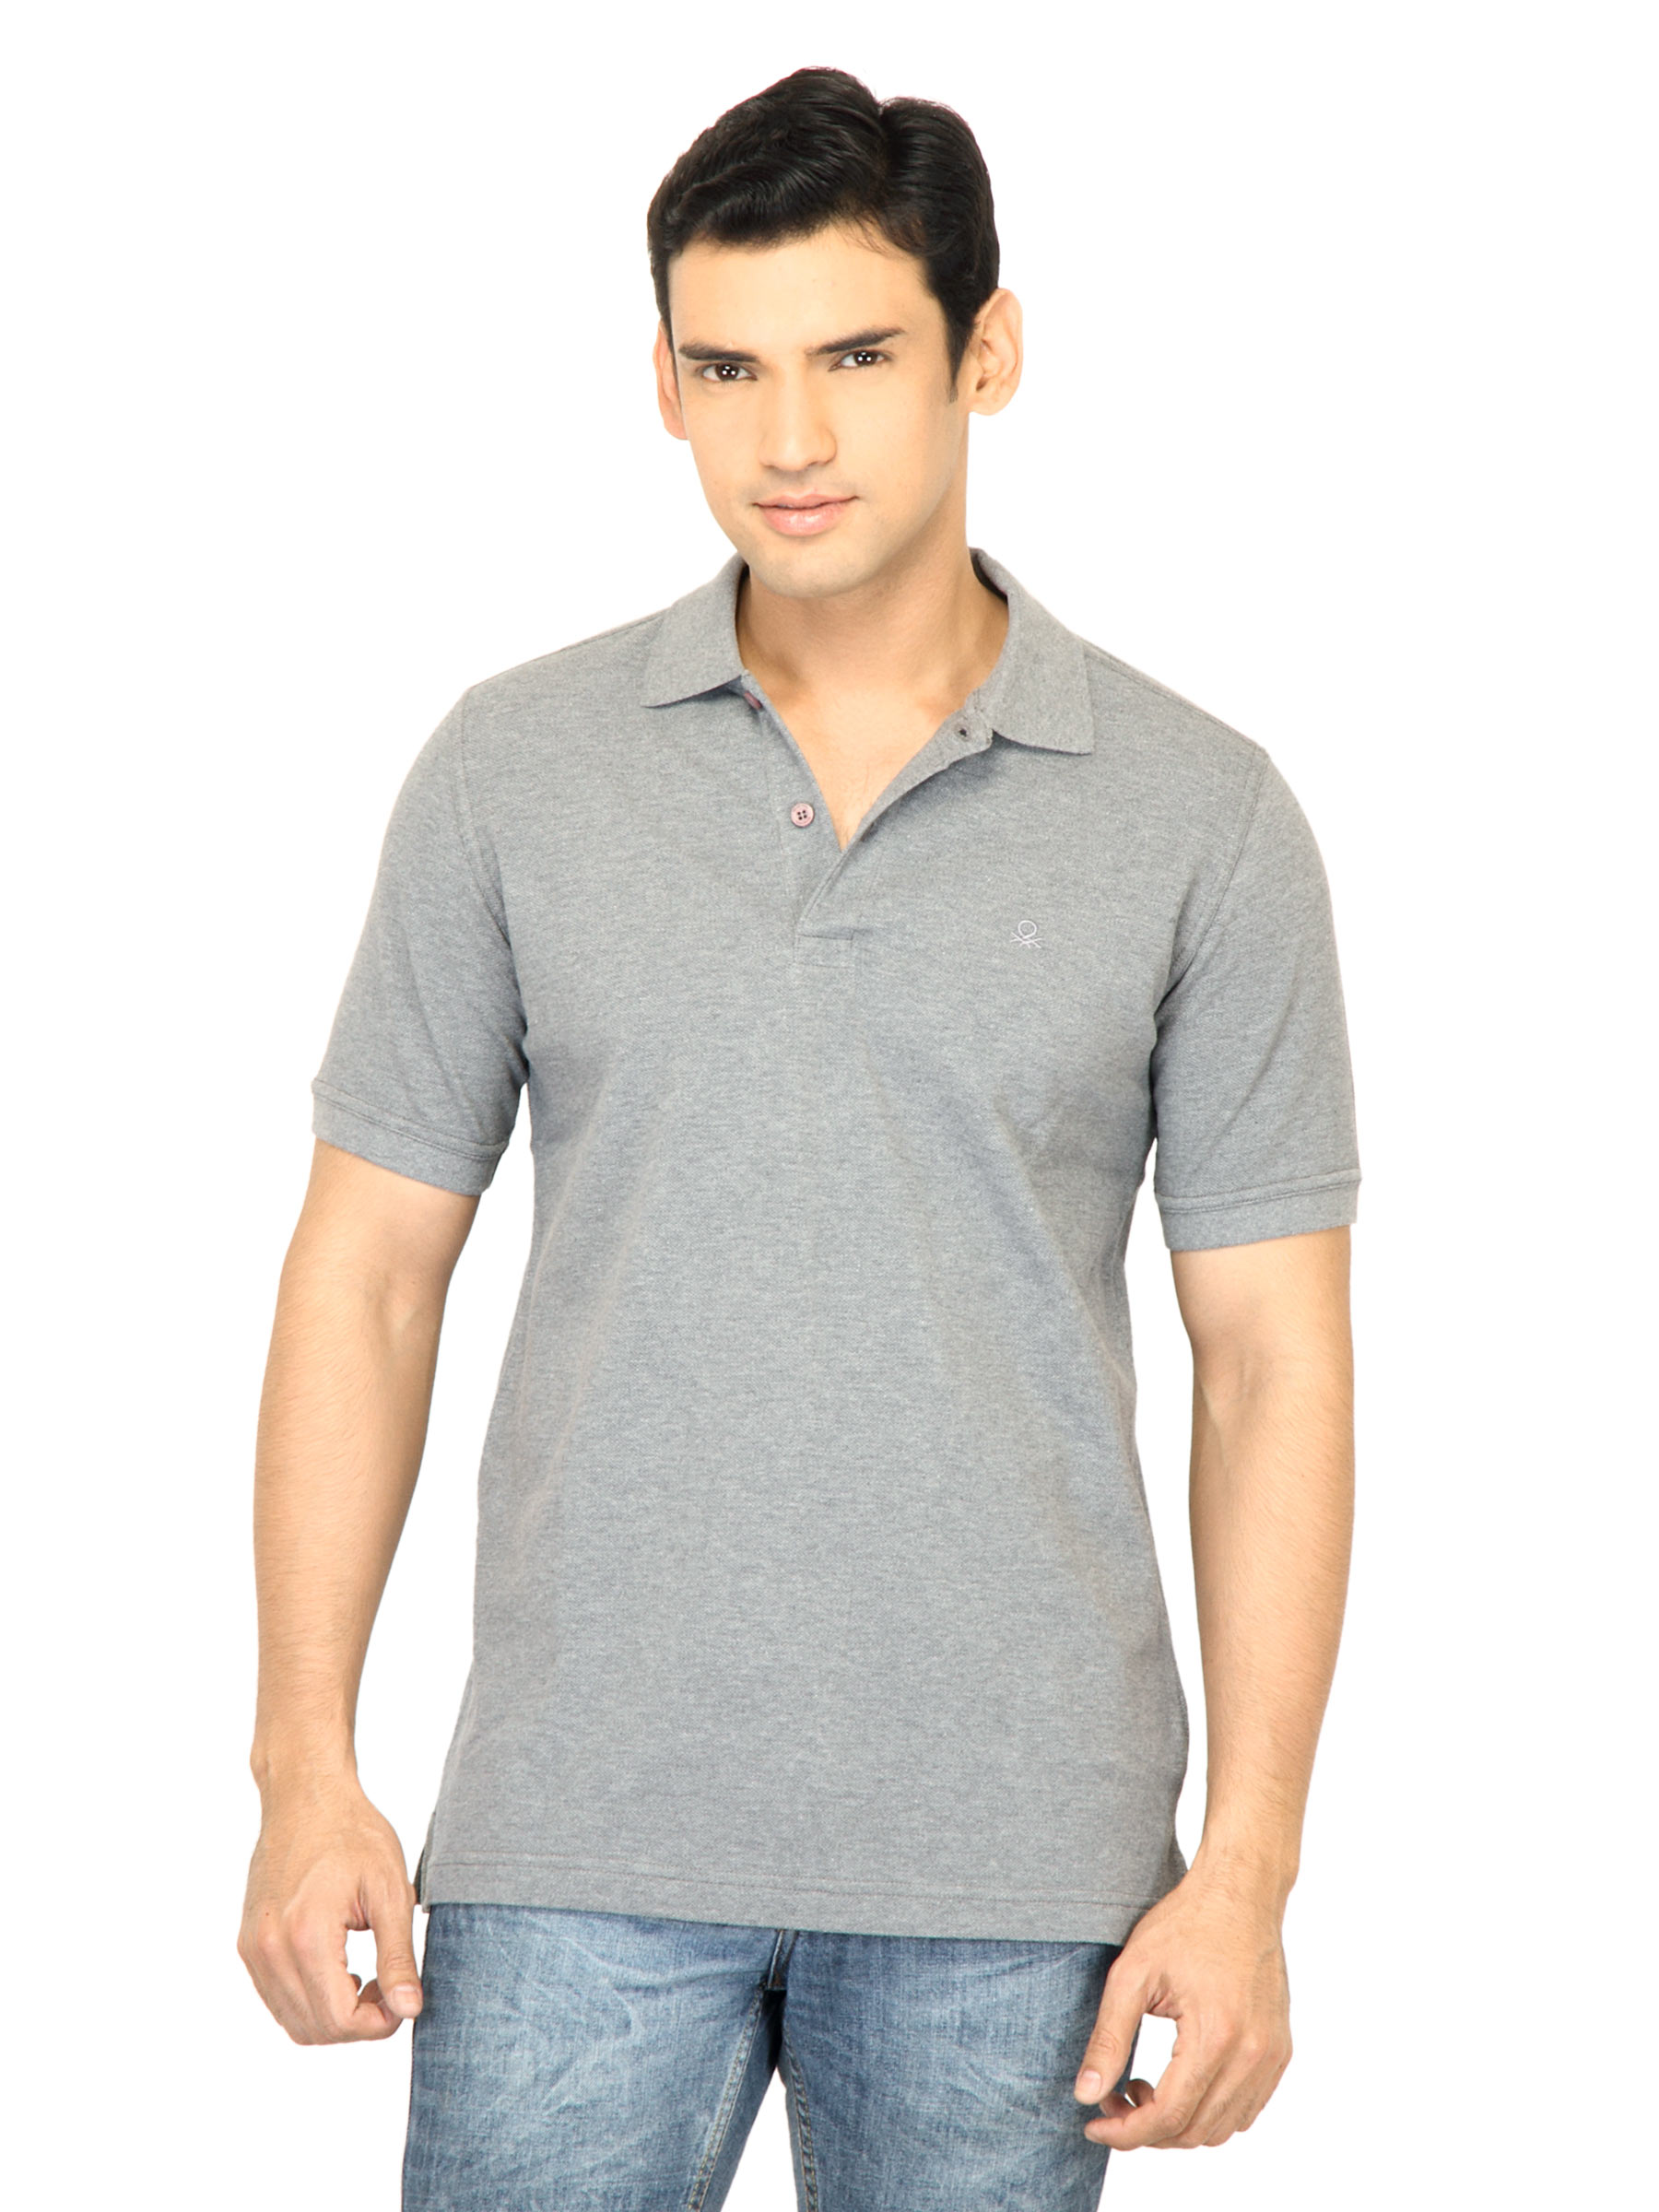 United Colors of Benetton Men Solid Grey Polo Tshirt